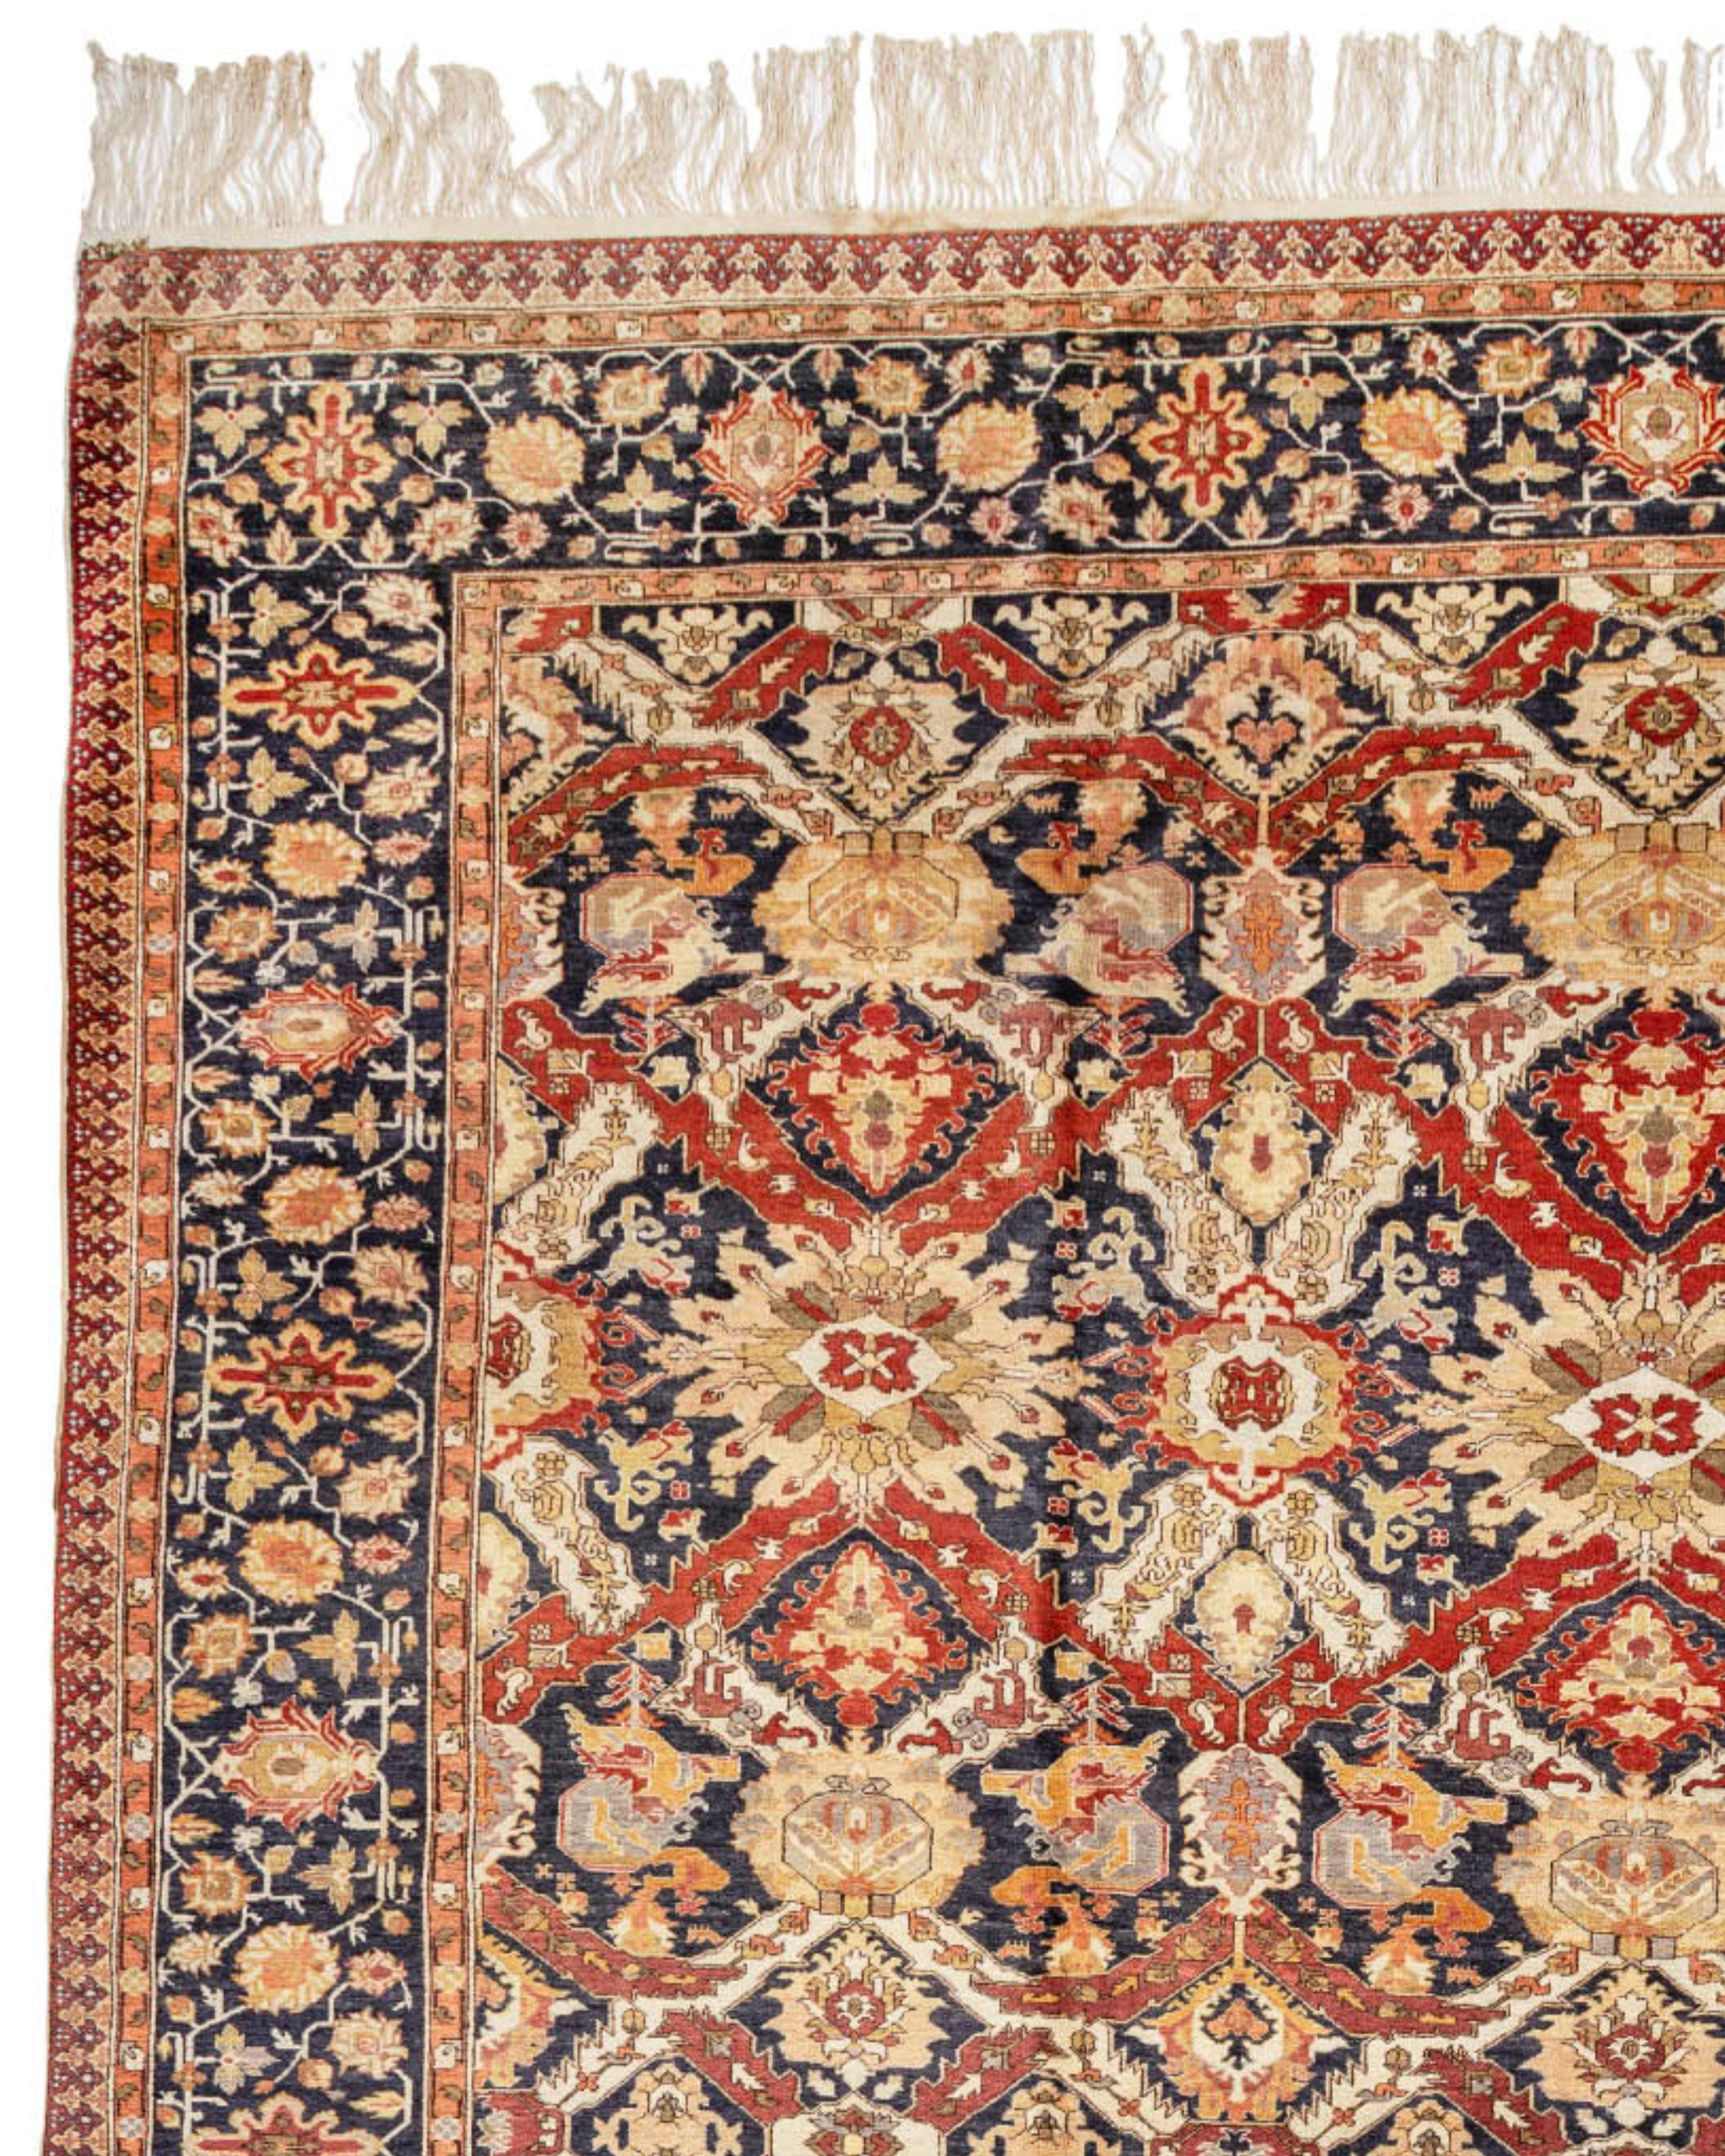 Antique Large Turkish Kayseri Carpet, c. 1900 In Excellent Condition For Sale In San Francisco, CA